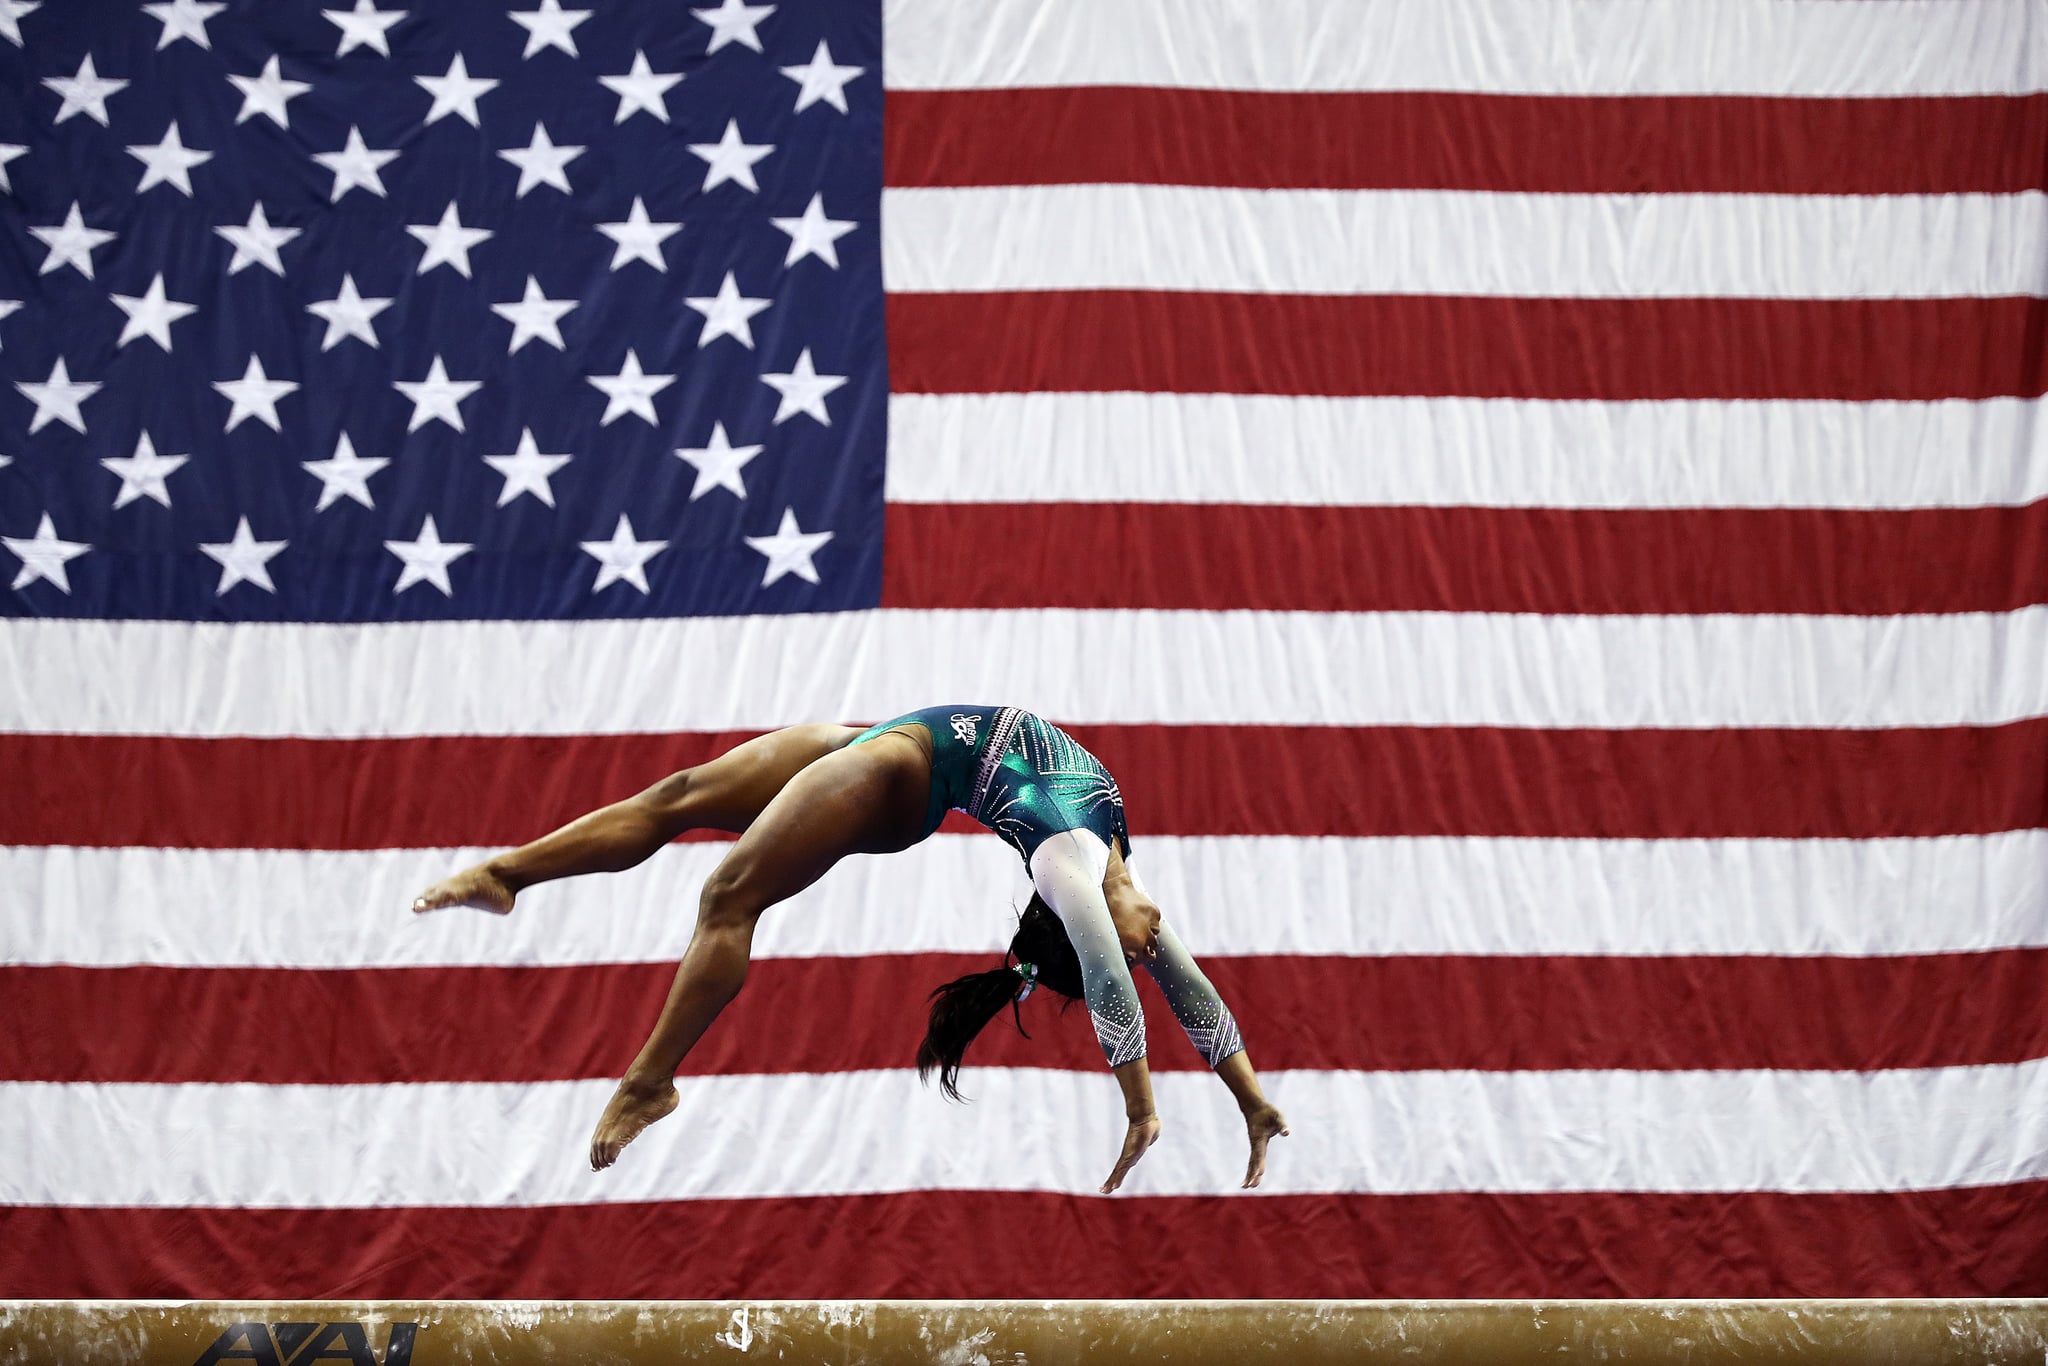 KANSAS CITY, MISSOURI - AUGUST 09:   Simone Biles competes on the balance beam during the Senior Women's competition of the 2019 U.S. Gymnastics Championships at the Sprint Centre on August 09, 2019 in Kansas City, Missouri. (Photo by Jamie Squire/Getty Images)